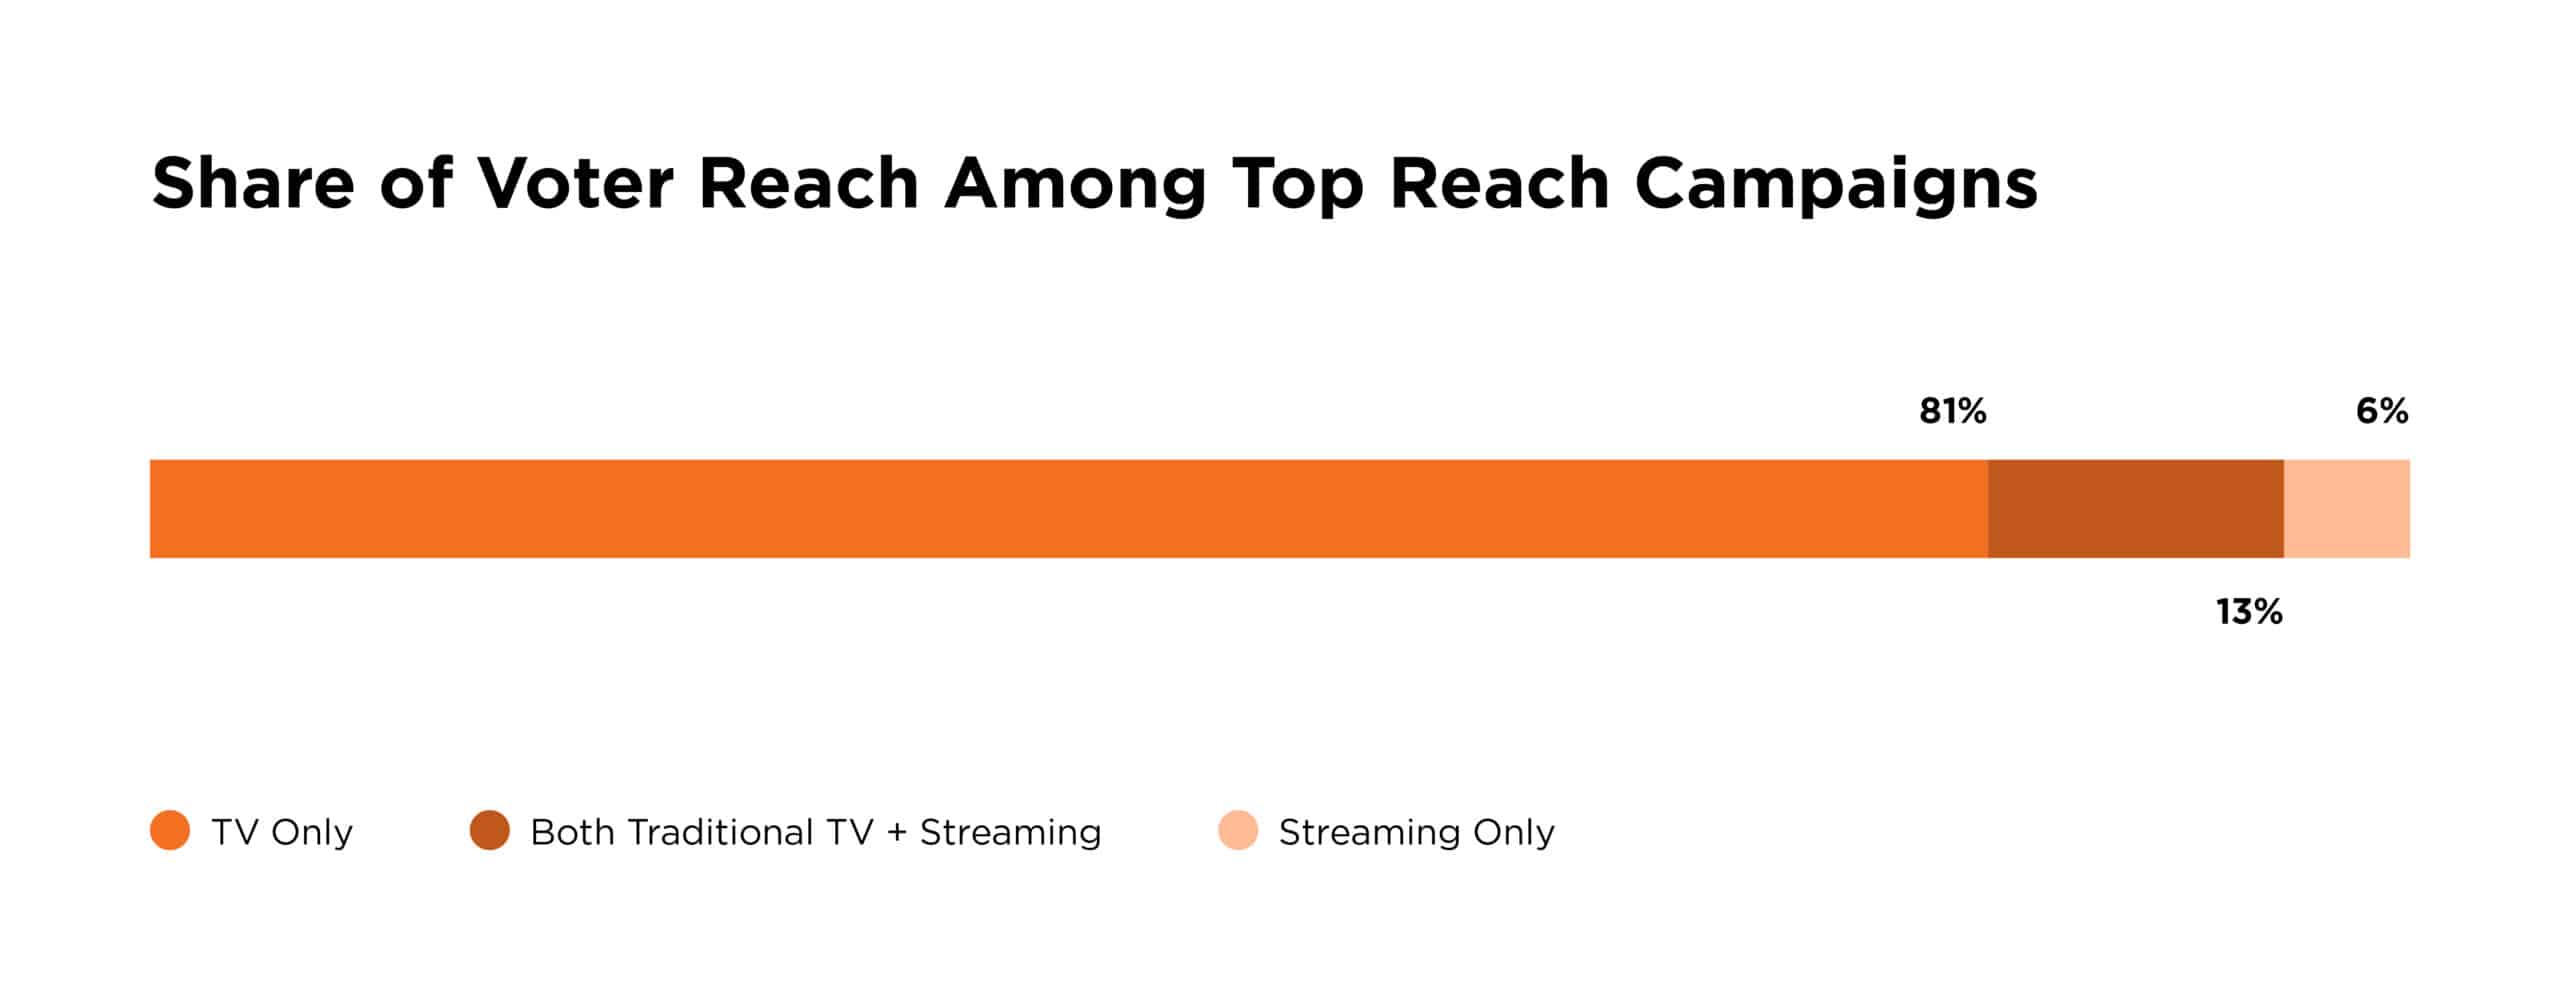 Bar chart of share of voter reach among top reach campaigns. 81% of voter reach was TV only.